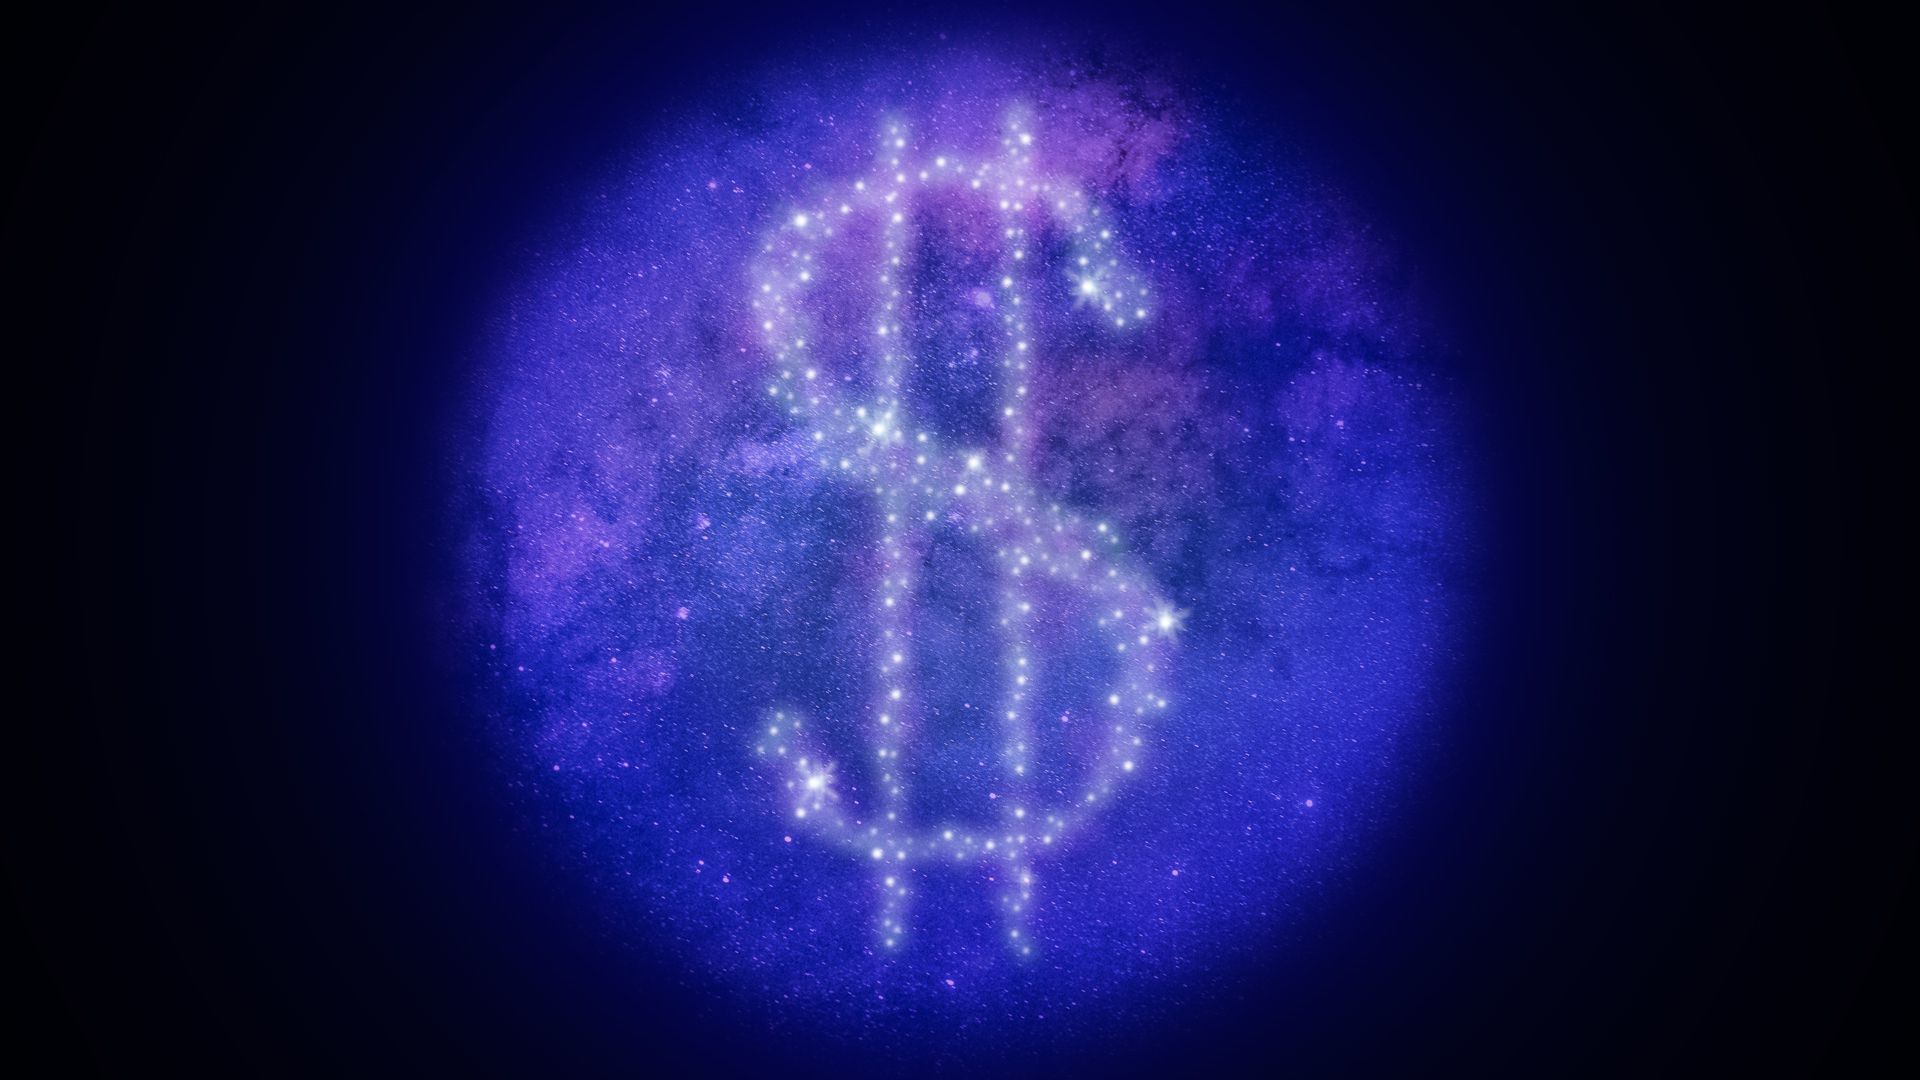 Illustration of a cluster of stars in the shape of a dollar sign as scene through a telescope lens